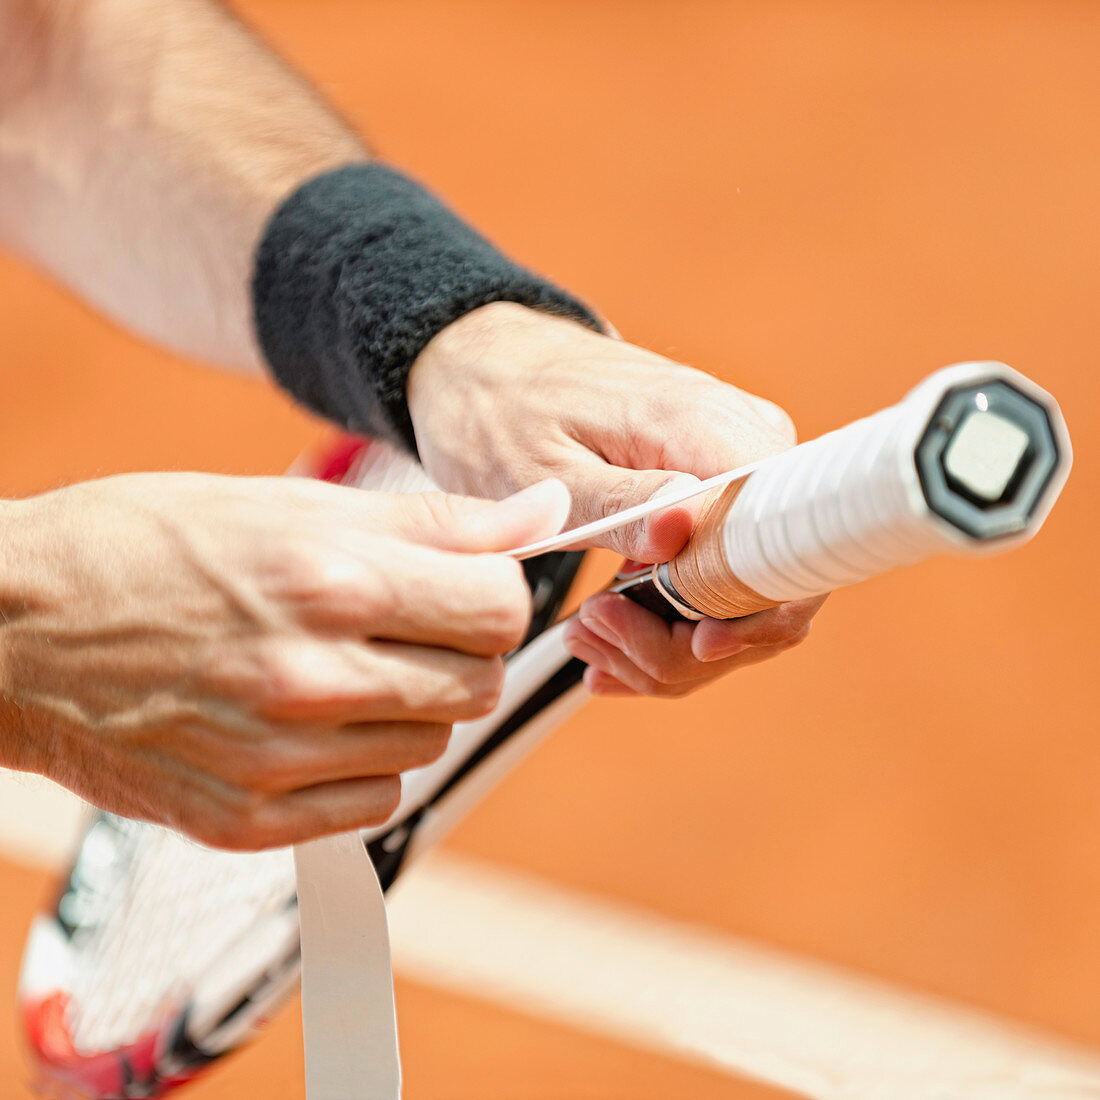 Player putting new grip tape on tennis racket